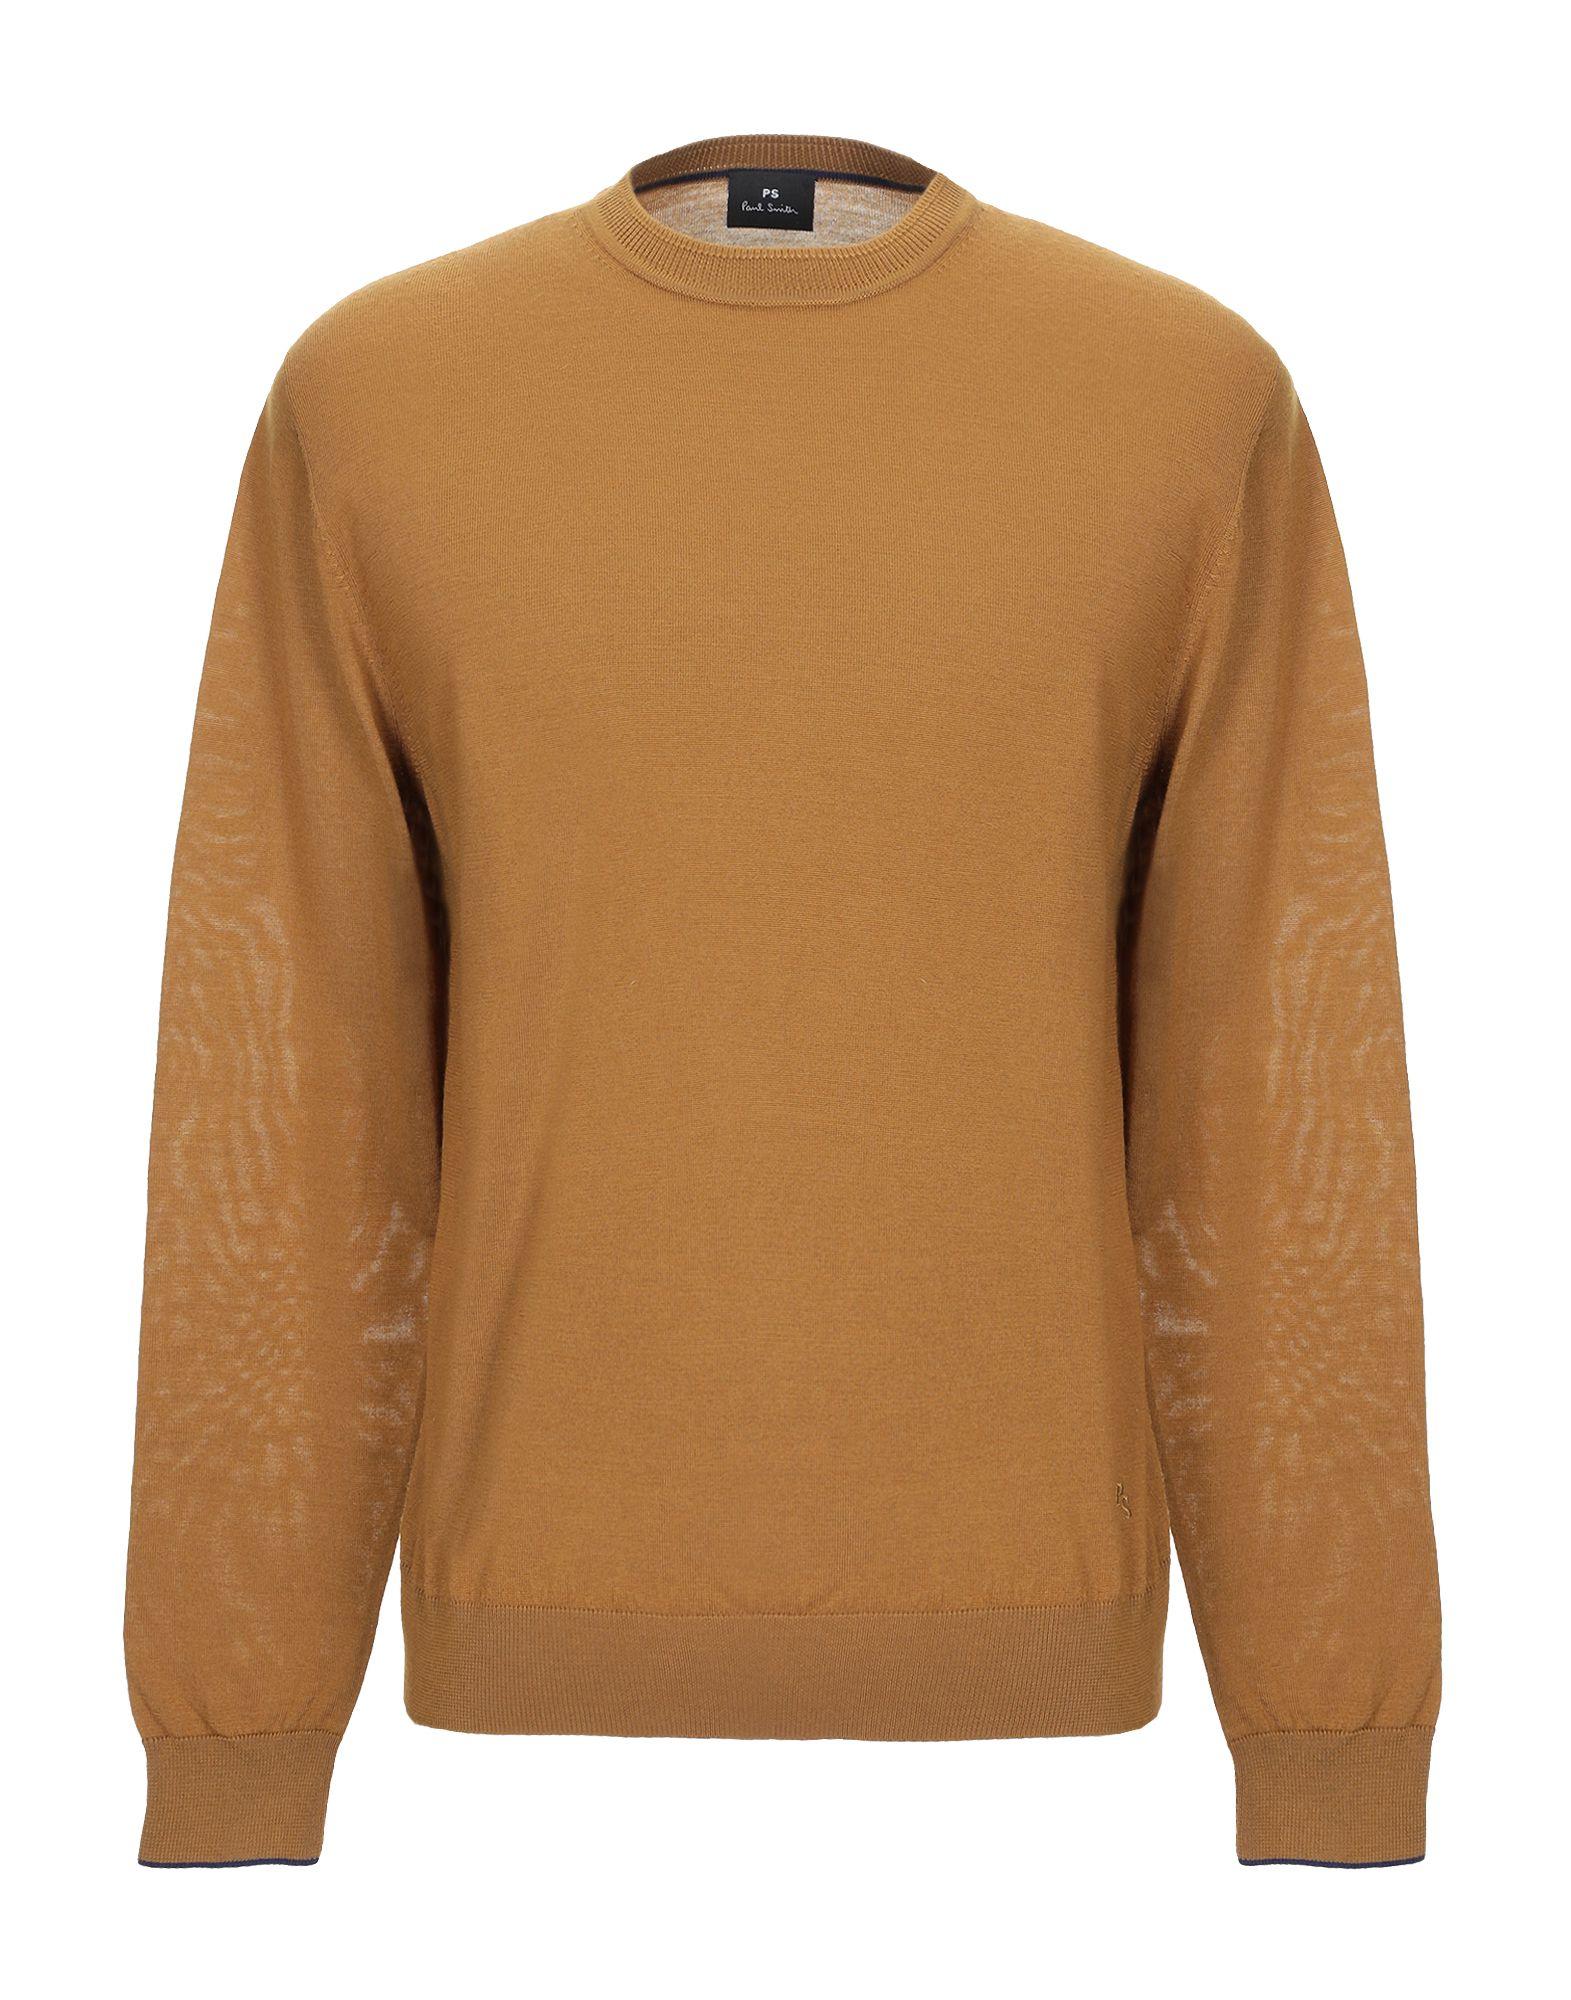 PS by Paul Smith Sweater in Brown for Men - Lyst